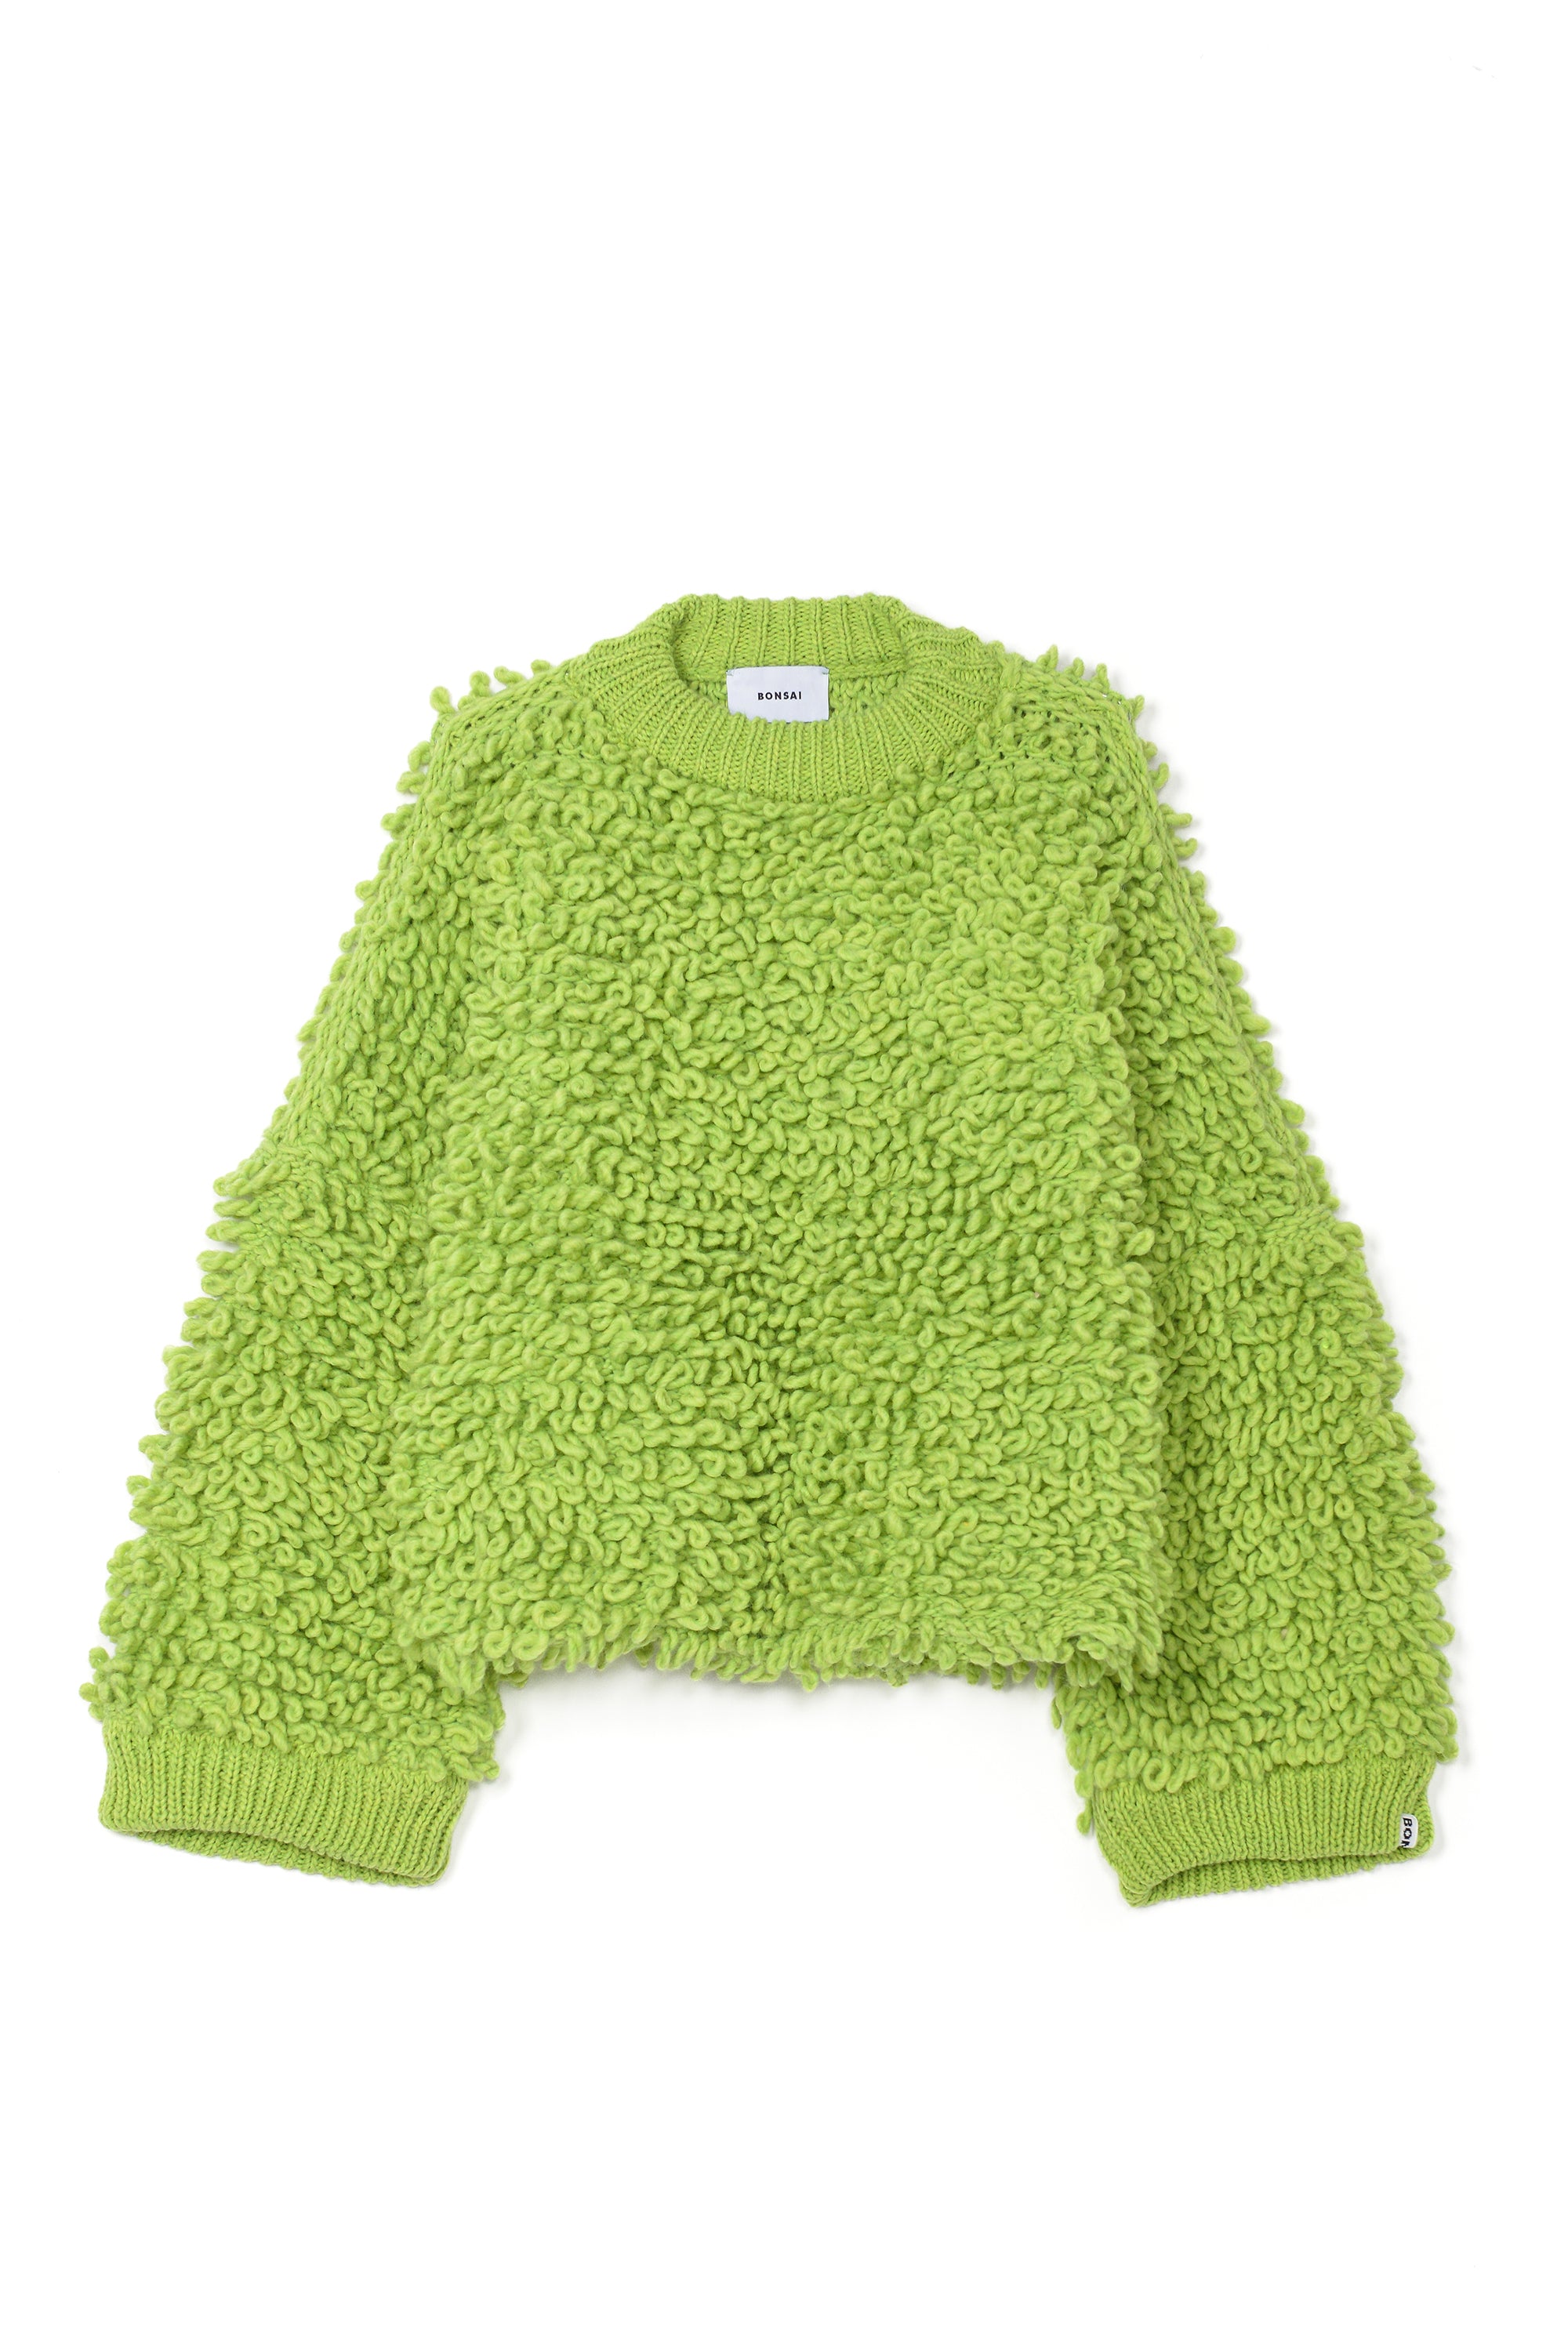 BUBBLE SWEATER-UP TO 70% OFF